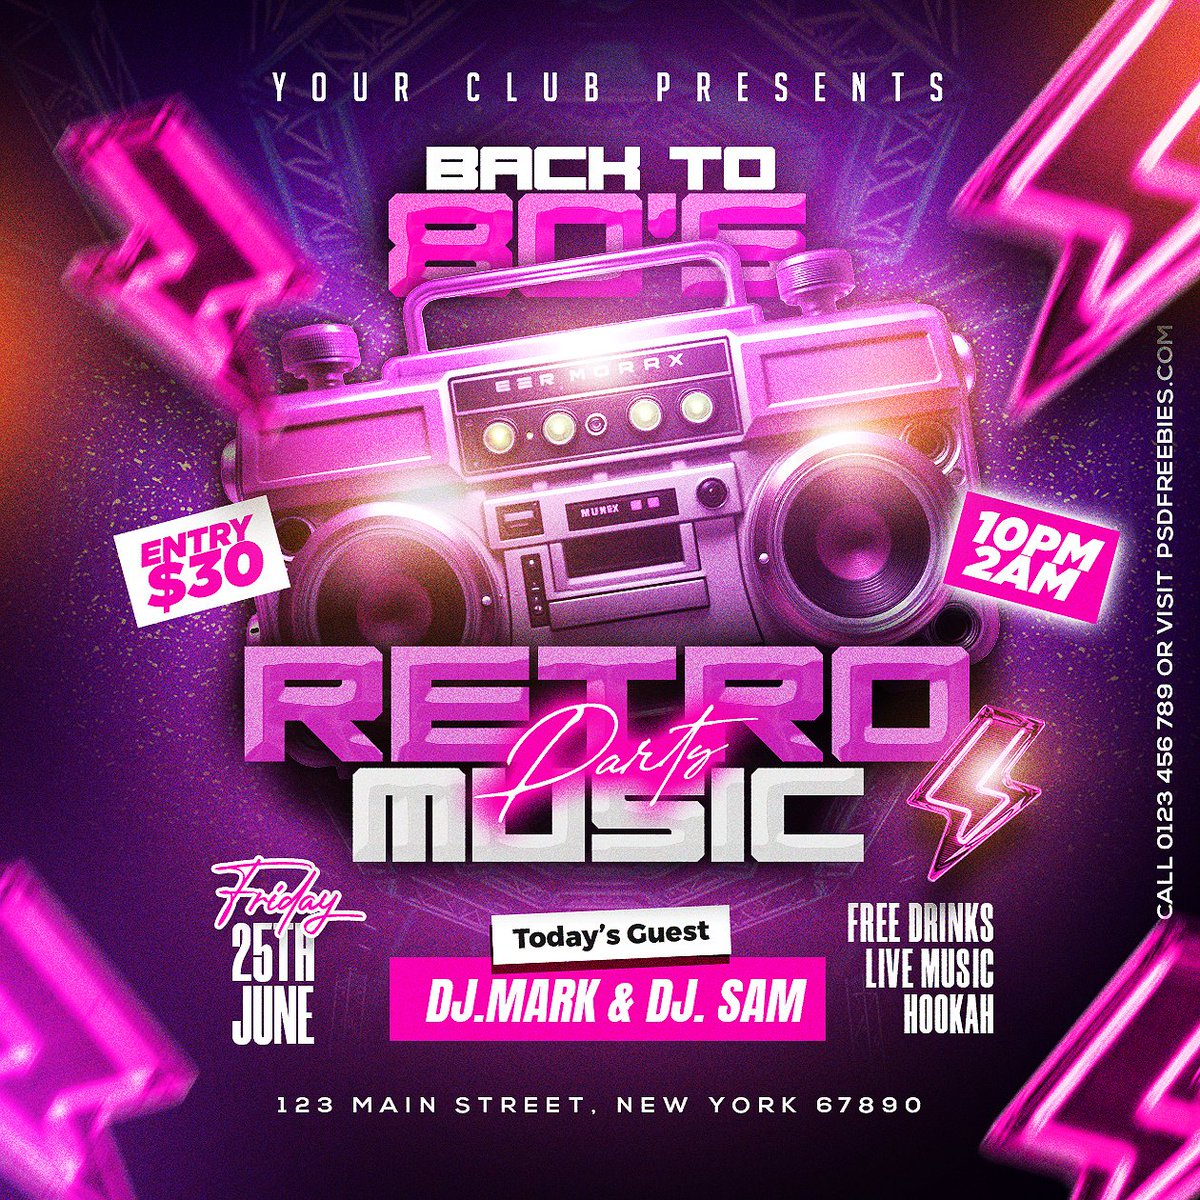 Free Retro Neon Music Party Post PSD Template

Download Link >> psdfreebies.com/psd/retro-neon…

#freepsd #psd #photoshop #socialmedia #facebookpost #Instagrampost #partypost #freetemplate #indierock #instagram #rockmusic #weekendparty